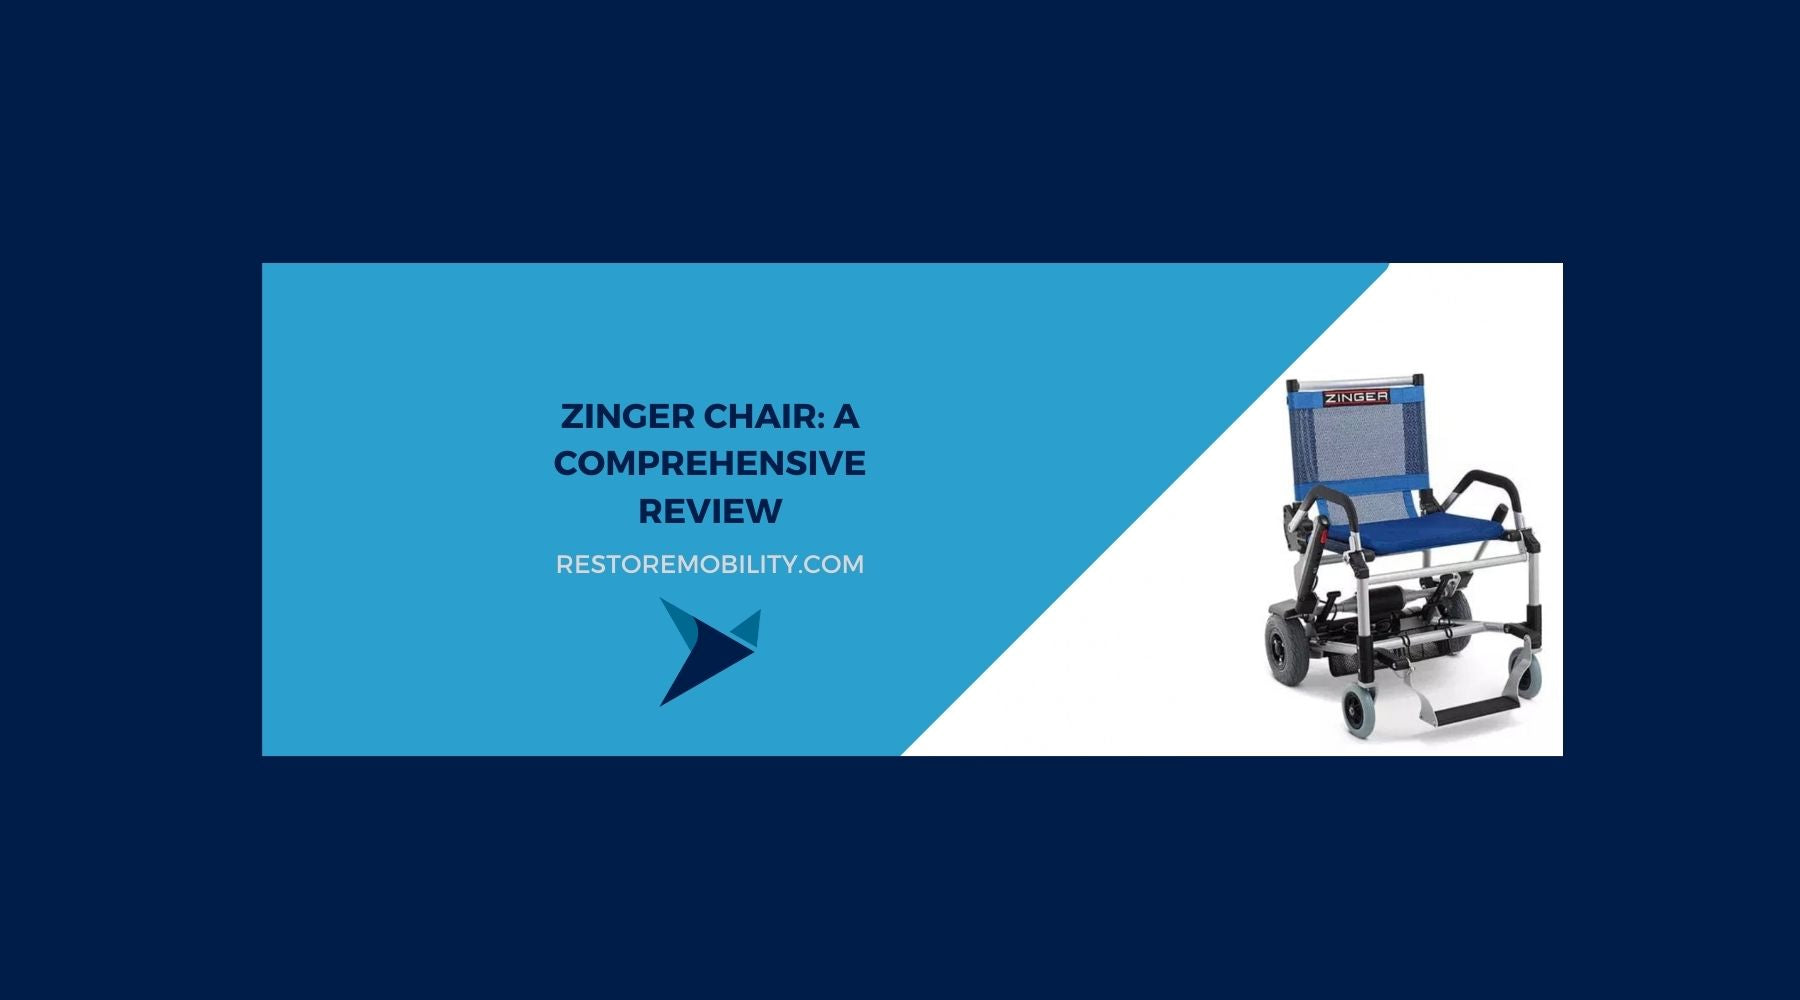 The Zinger Chair: A Comprehensive Review